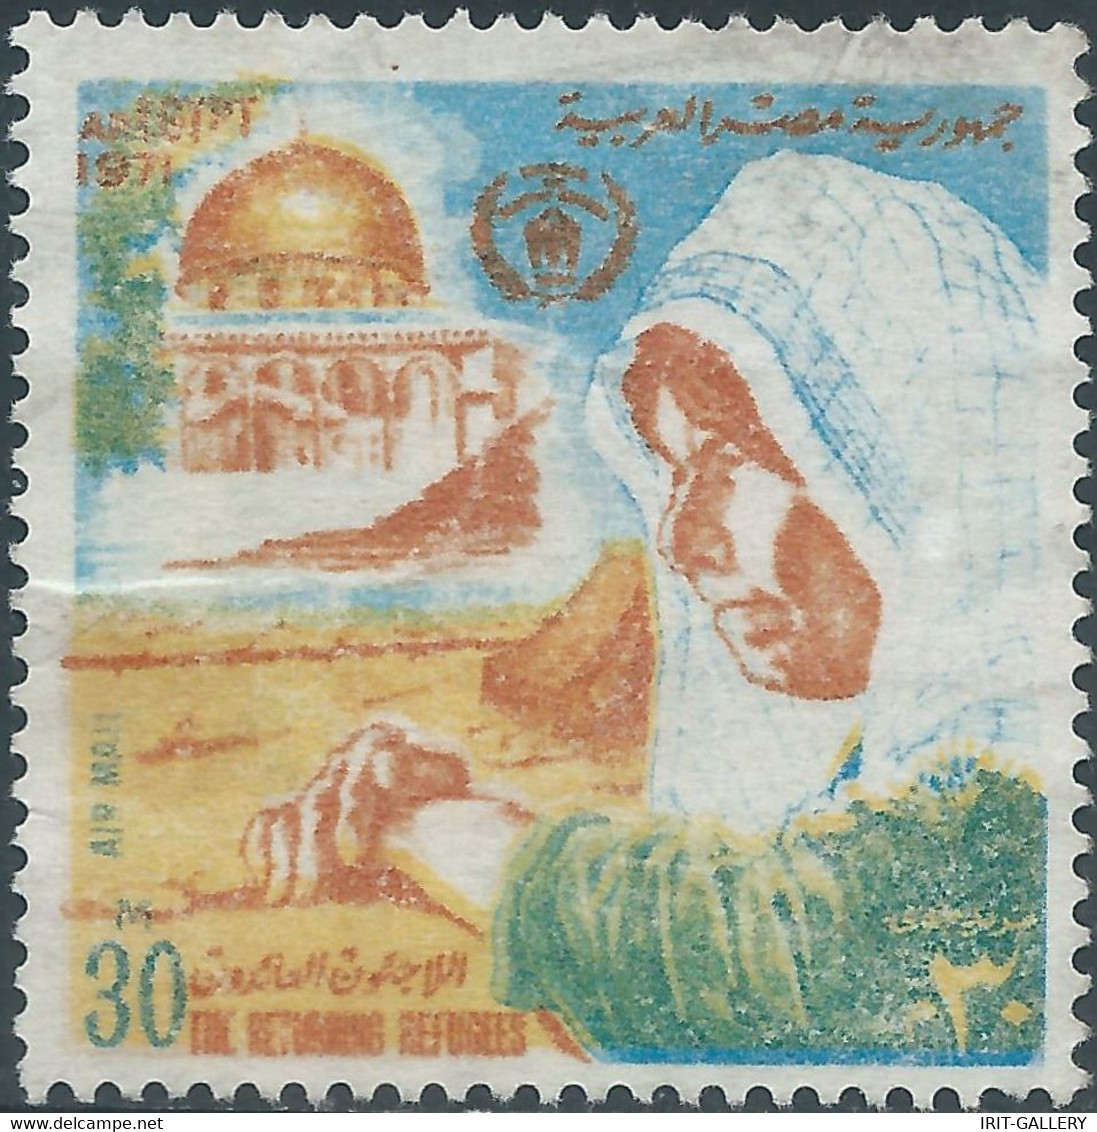 EGITTO - EGYPT-  EGYPTE,1971 Airmail - United Nations Day ,Used - Oblitérés